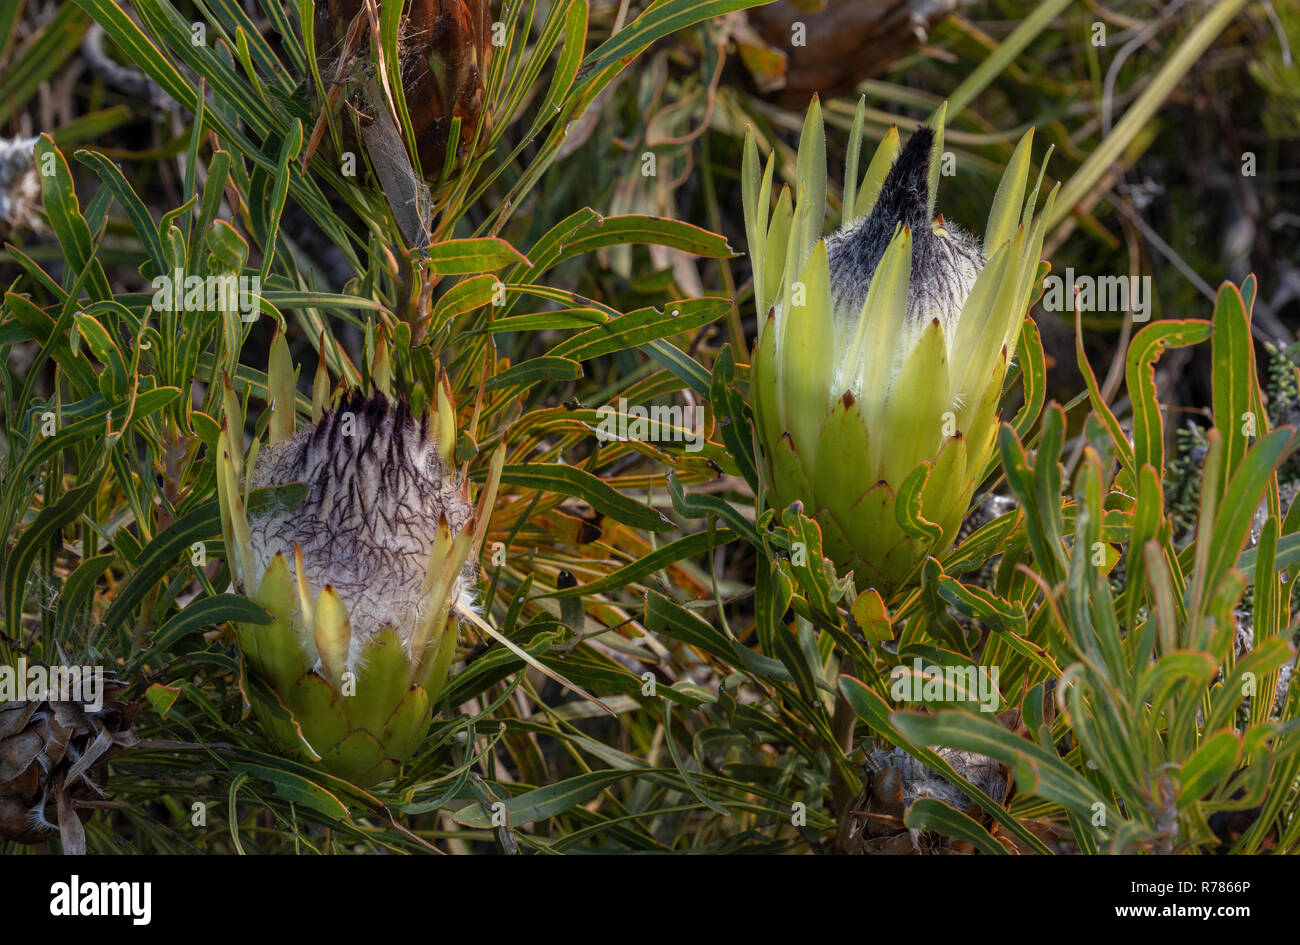 long-leaf sugarbush, Protea longifolia, in flower in fynbos, Fernkloof Nature Reserve, Cape, South Africa. Stock Photo